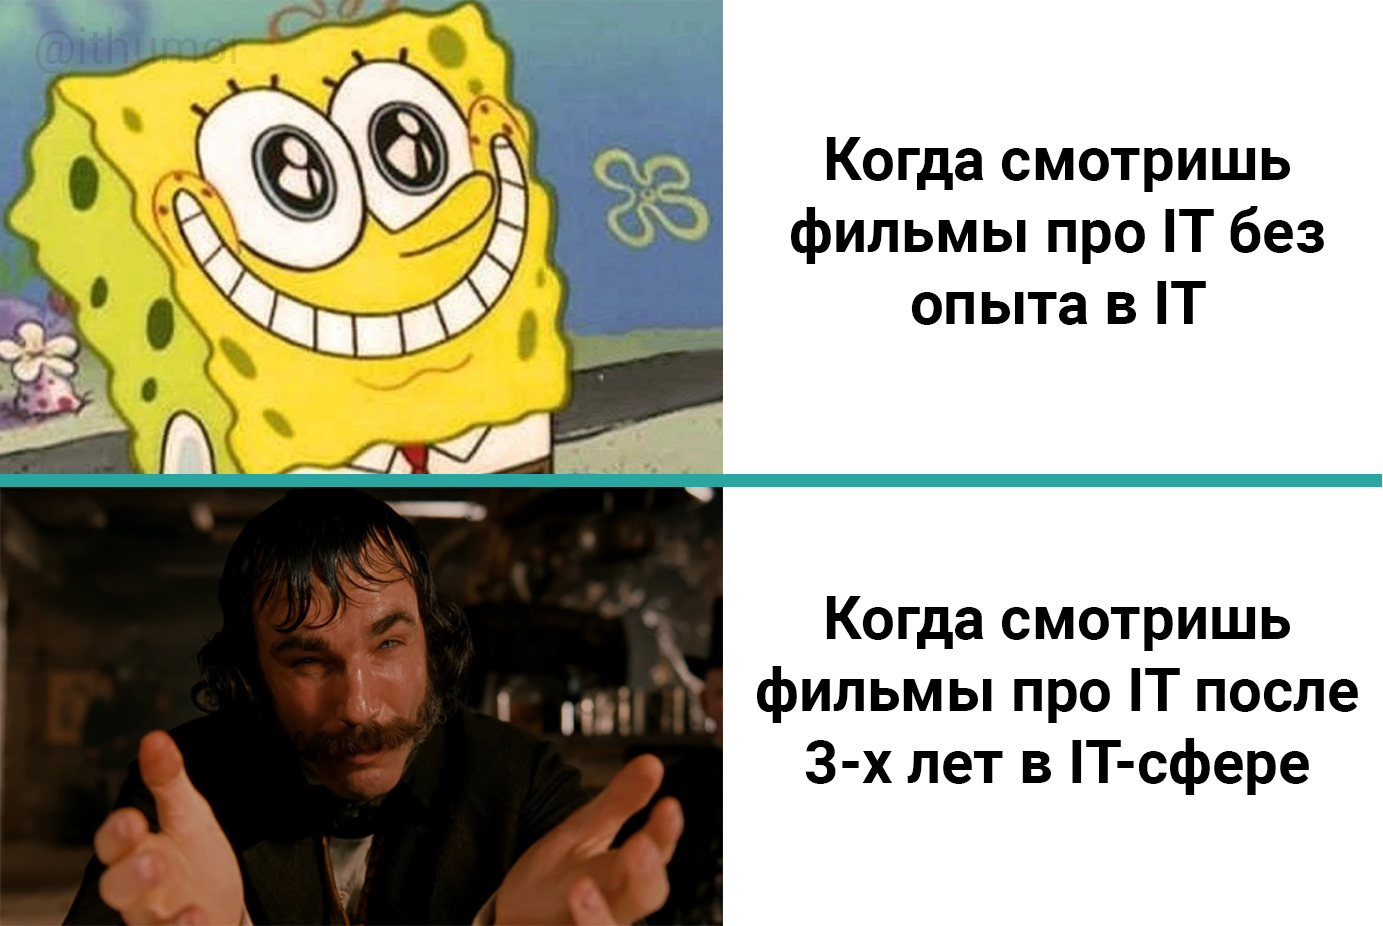 What good movies and TV shows about IT do you know? - IT, IT humor, SpongeBob, Picture with text